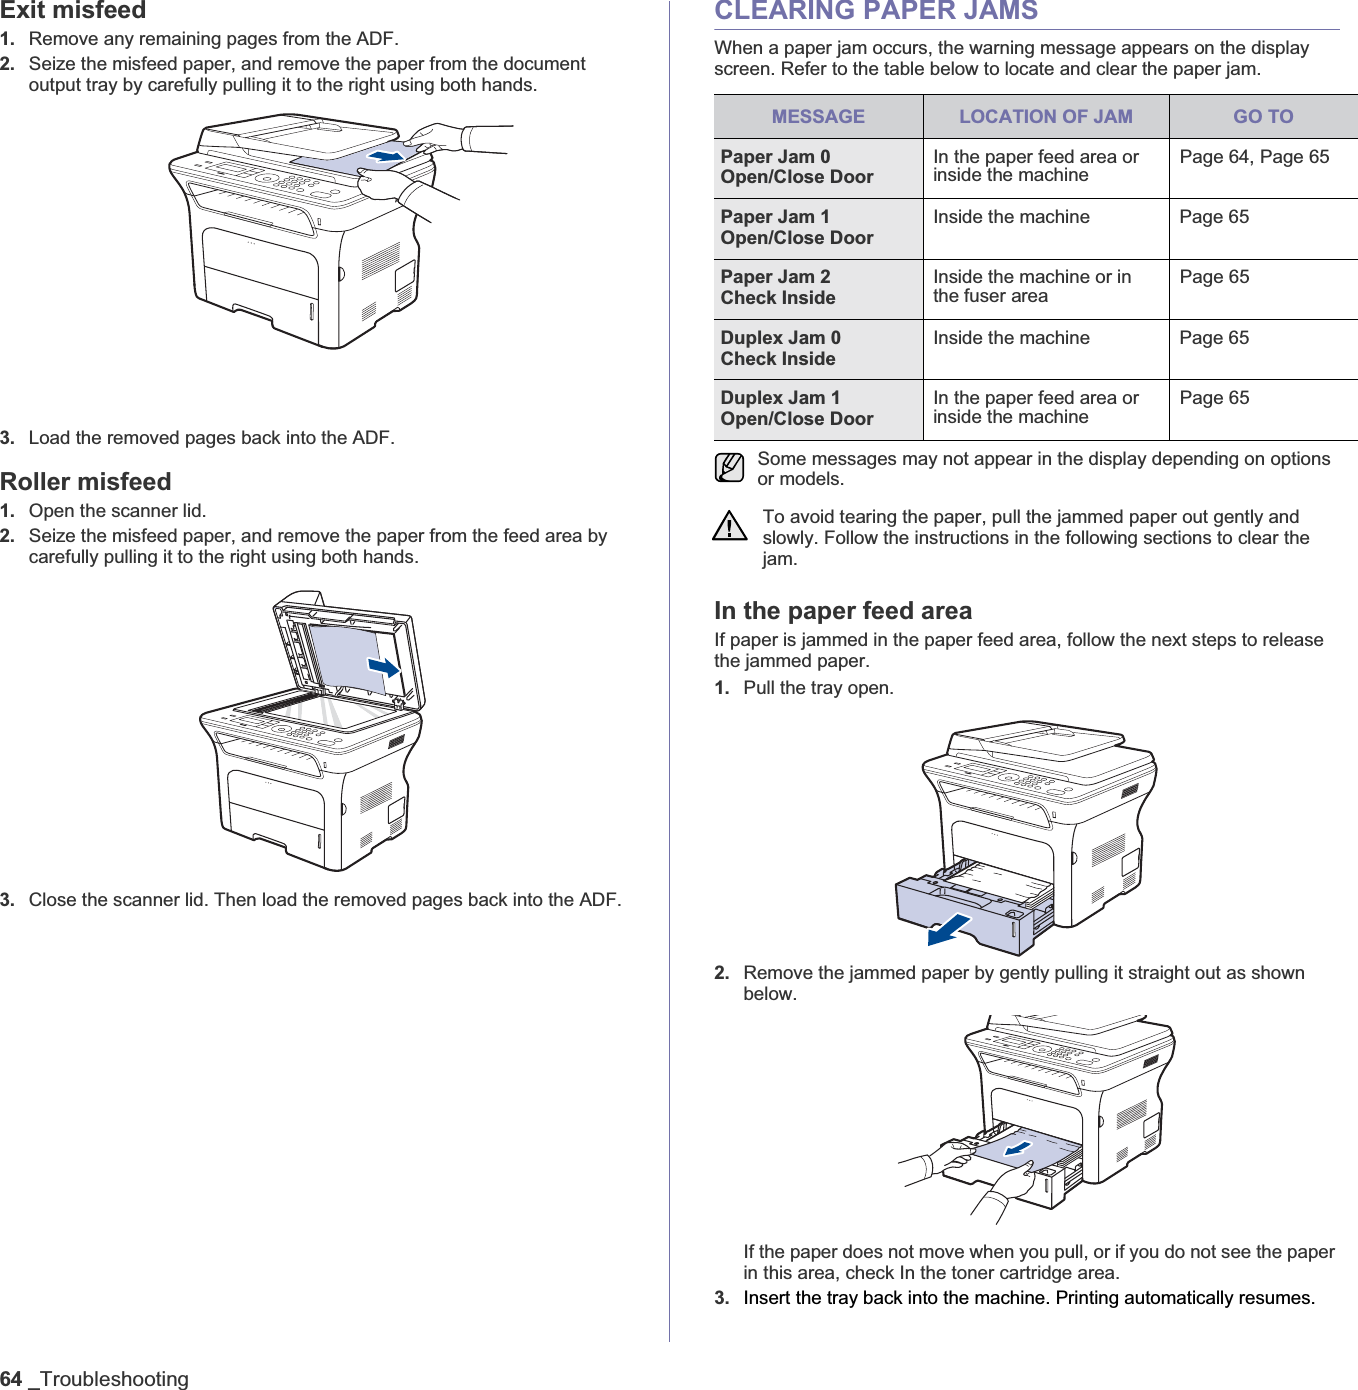 64 _TroubleshootingExit misfeed1. Remove any remaining pages from the ADF.2. Seize the misfeed paper, and remove the paper from the document output tray by carefully pulling it to the right using both hands.3. Load the removed pages back into the ADF.Roller misfeed1. Open the scanner lid.2. Seize the misfeed paper, and remove the paper from the feed area by carefully pulling it to the right using both hands.3. Close the scanner lid. Then load the removed pages back into the ADF.CLEARING PAPER JAMSWhen a paper jam occurs, the warning message appears on the display screen. Refer to the table below to locate and clear the paper jam.In the paper feed area If paper is jammed in the paper feed area, follow the next steps to release the jammed paper. 1. Pull the tray open. 2. Remove the jammed paper by gently pulling it straight out as shown below.If the paper does not move when you pull, or if you do not see the paper in this area, check In the toner cartridge area.3. Insert the tray back into the machine. Printing automatically resumes.MESSAGE LOCATION OF JAM GO TOPaper Jam 0Open/Close DoorIn the paper feed area or inside the machinePage 64, Page 65Paper Jam 1Open/Close DoorInside the machine Page 65Paper Jam 2Check InsideInside the machine or in the fuser areaPage 65Duplex Jam 0Check InsideInside the machine Page 65Duplex Jam 1Open/Close DoorIn the paper feed area or inside the machinePage 65Some messages may not appear in the display depending on options or models. To avoid tearing the paper, pull the jammed paper out gently and slowly. Follow the instructions in the following sections to clear the jam. 